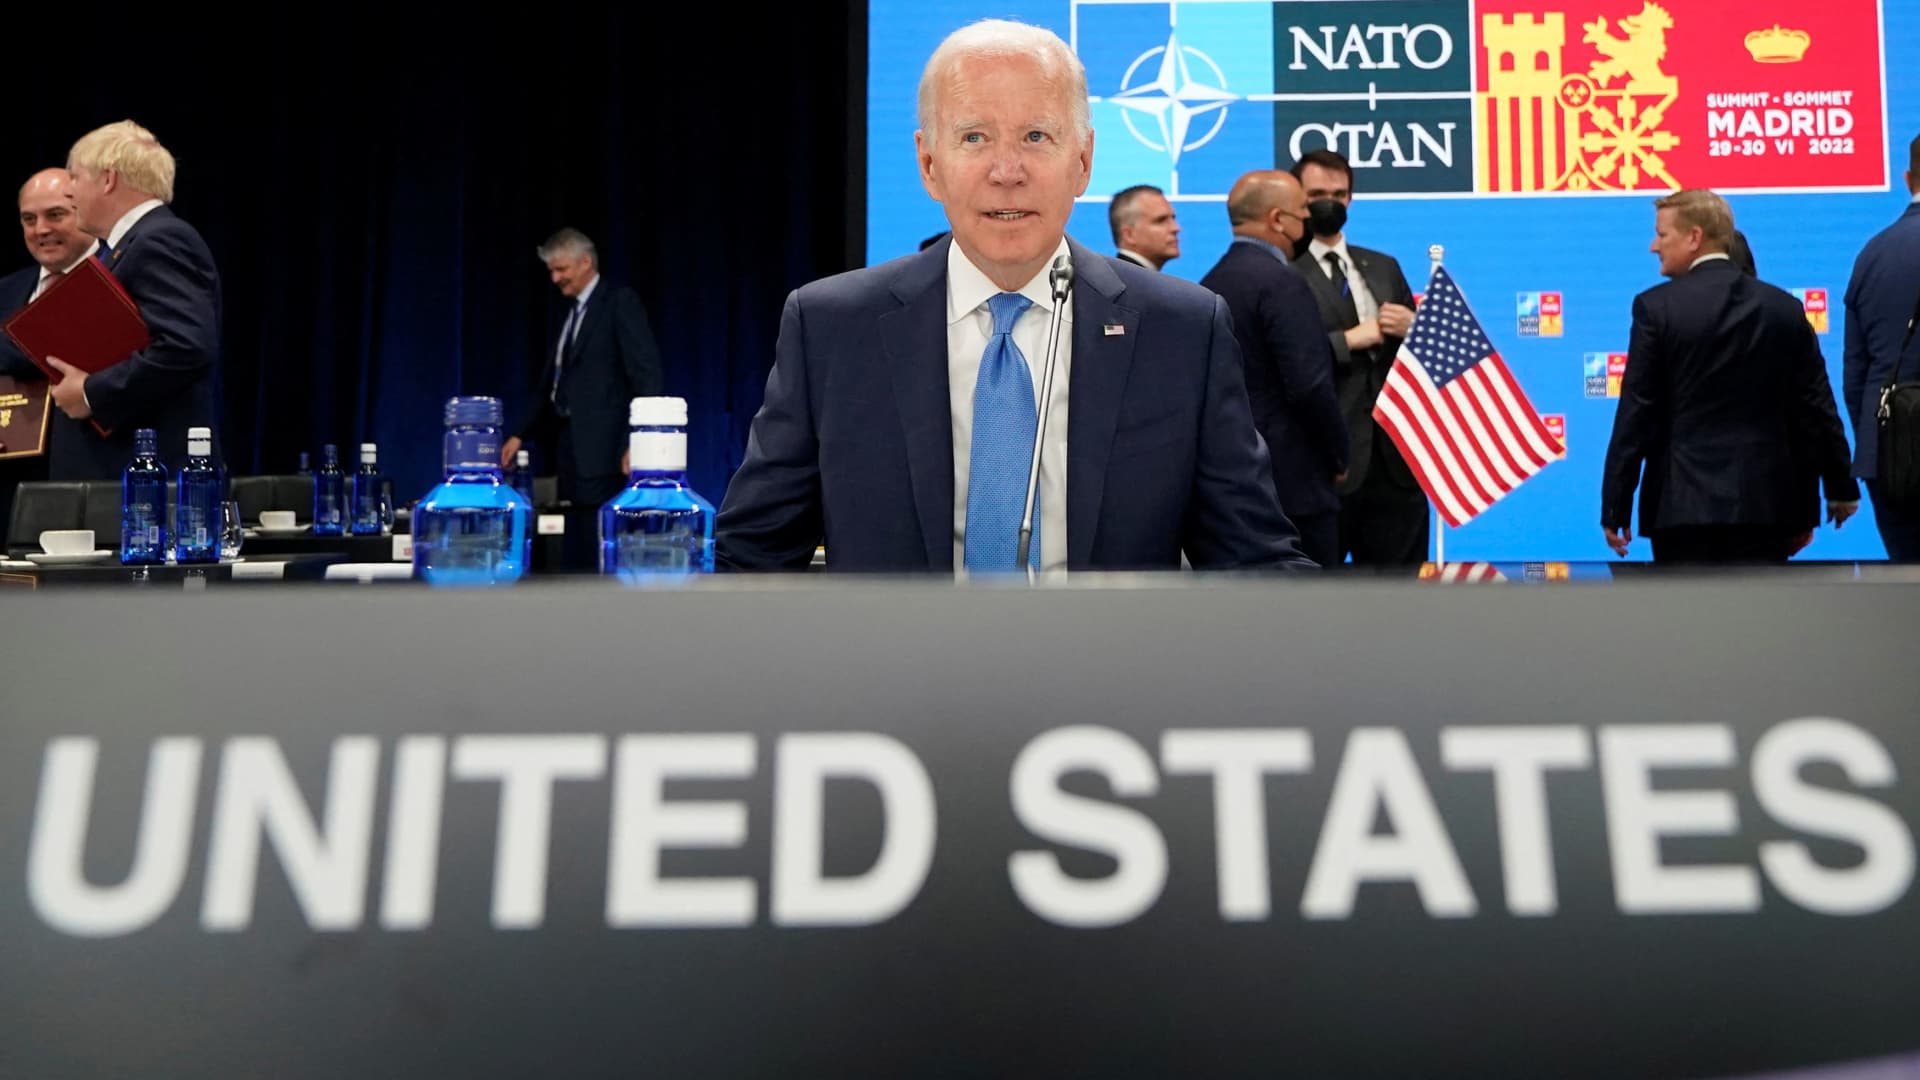 U.S. President Joe Biden waits for the start of a round table meeting at the NATO summit in Madrid, Spain June 29, 2022.